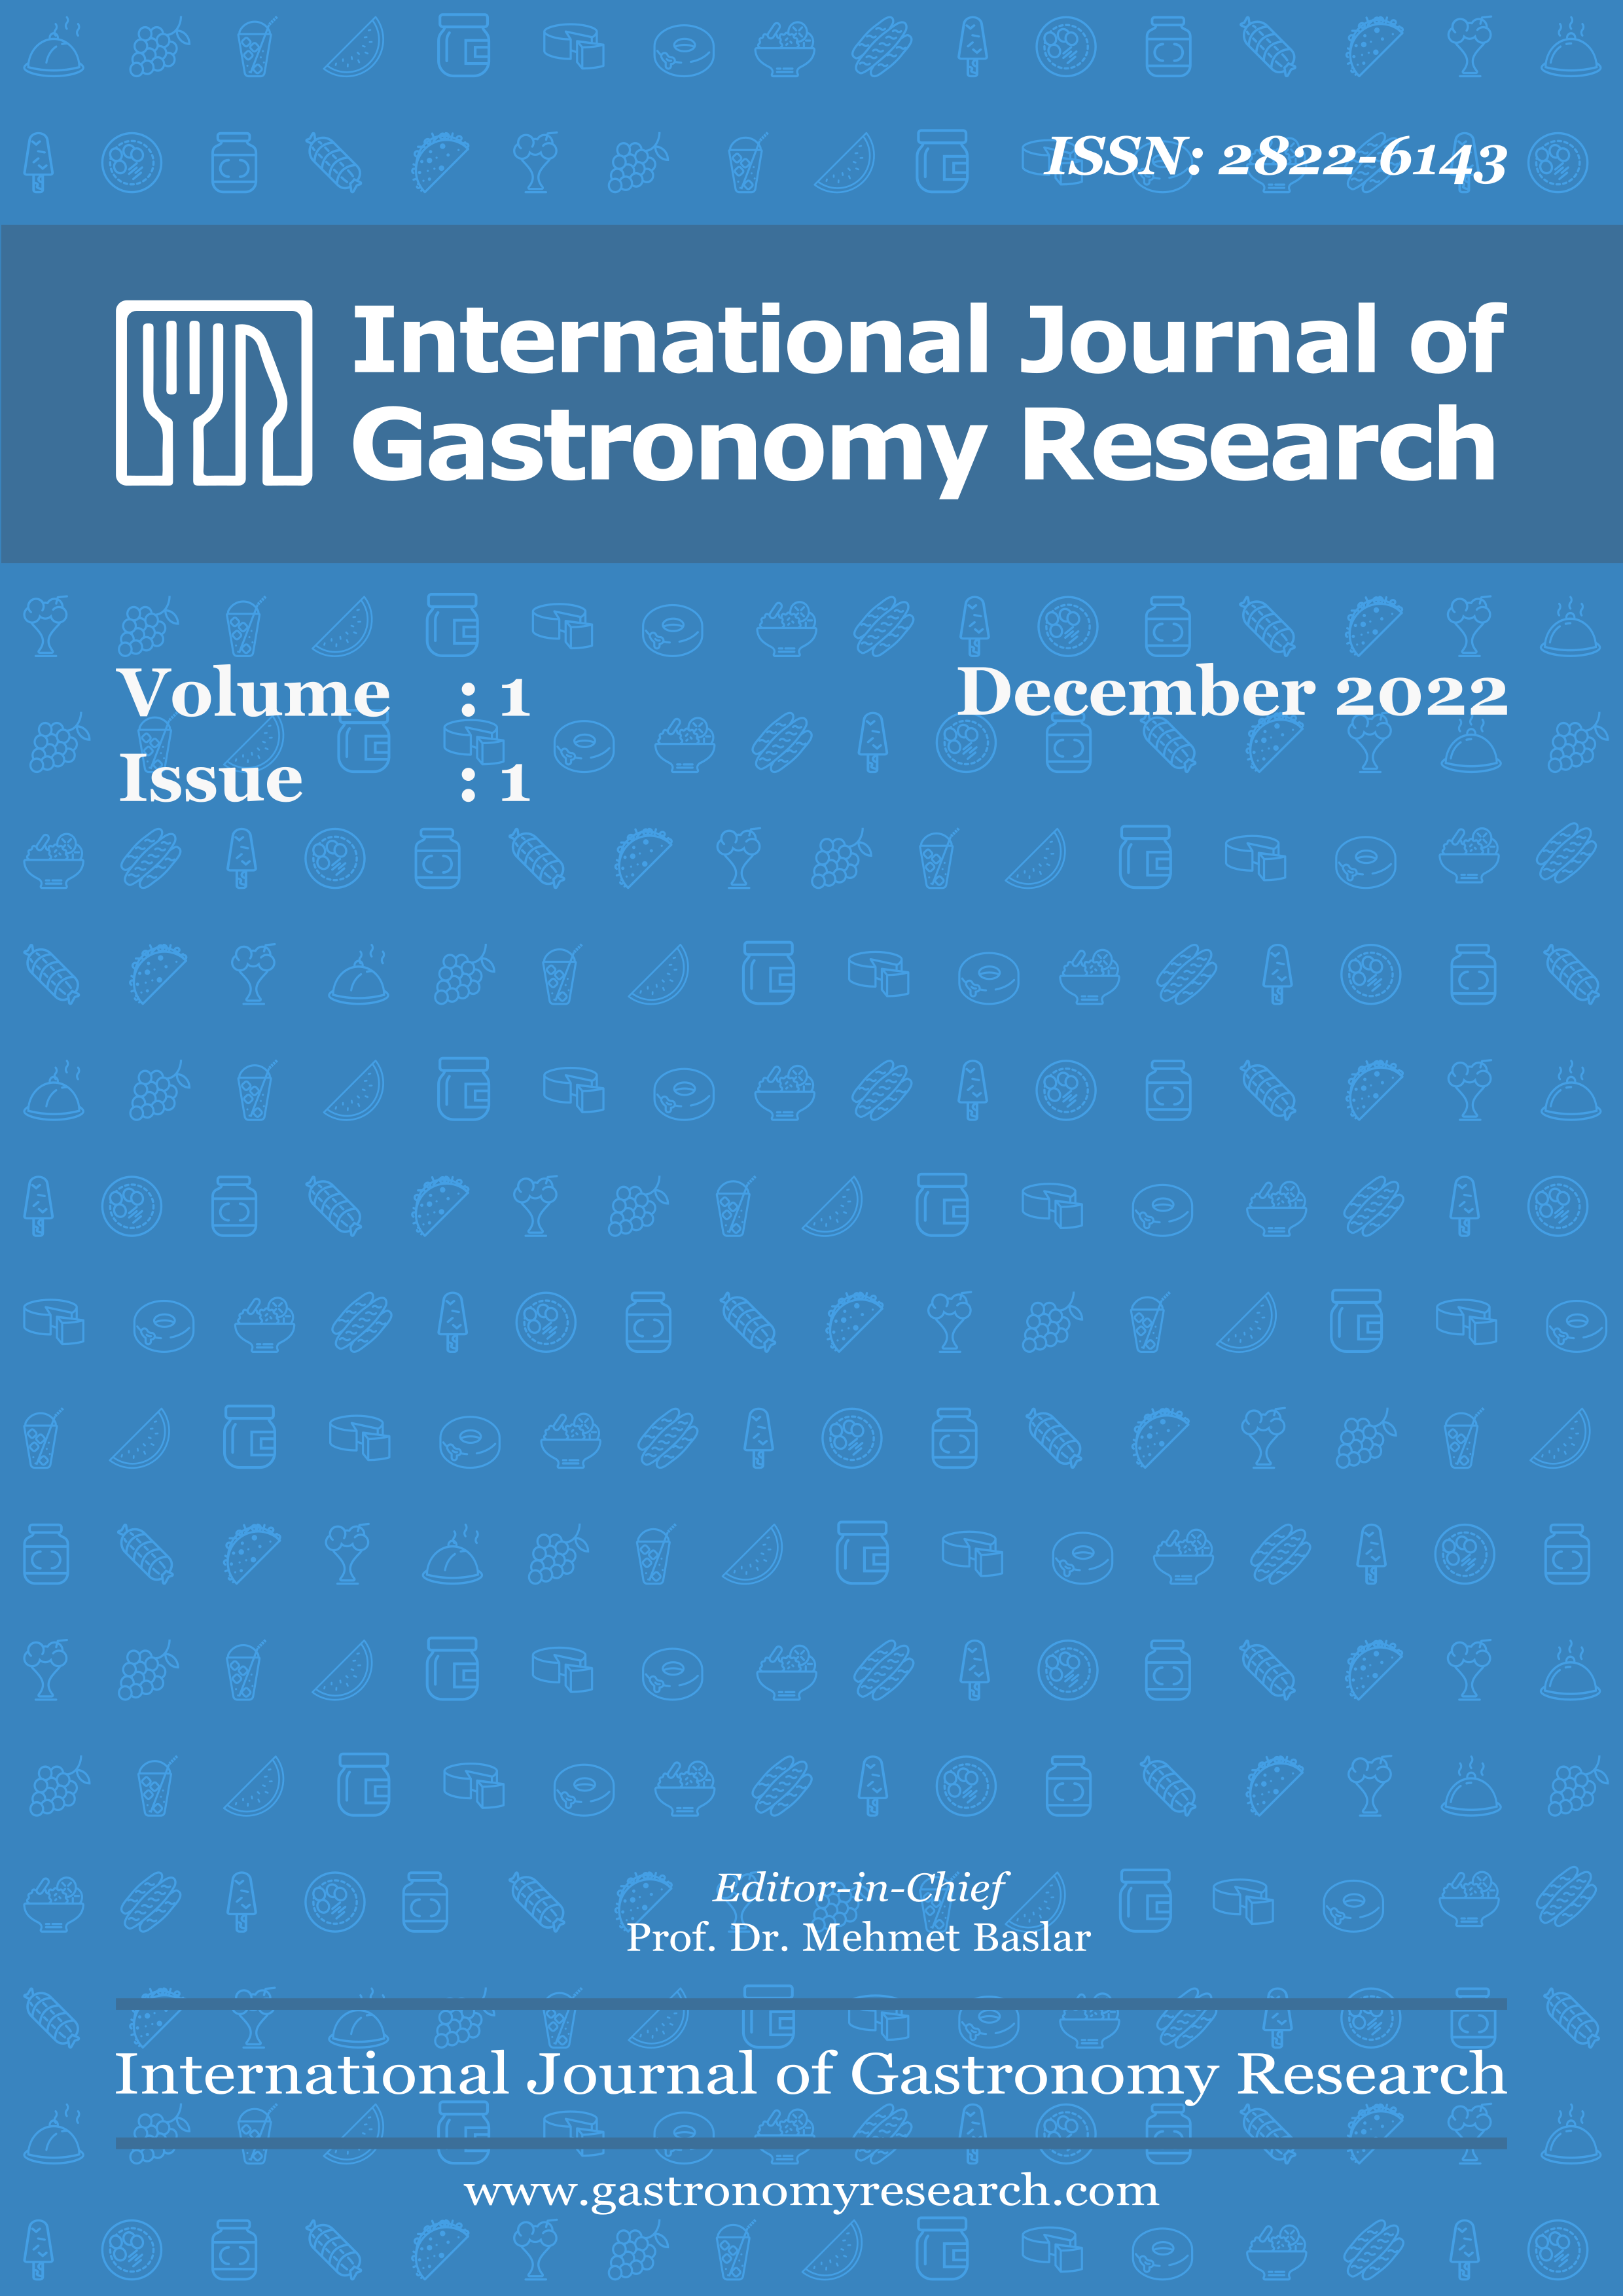 International Journal of Gastronomy Research